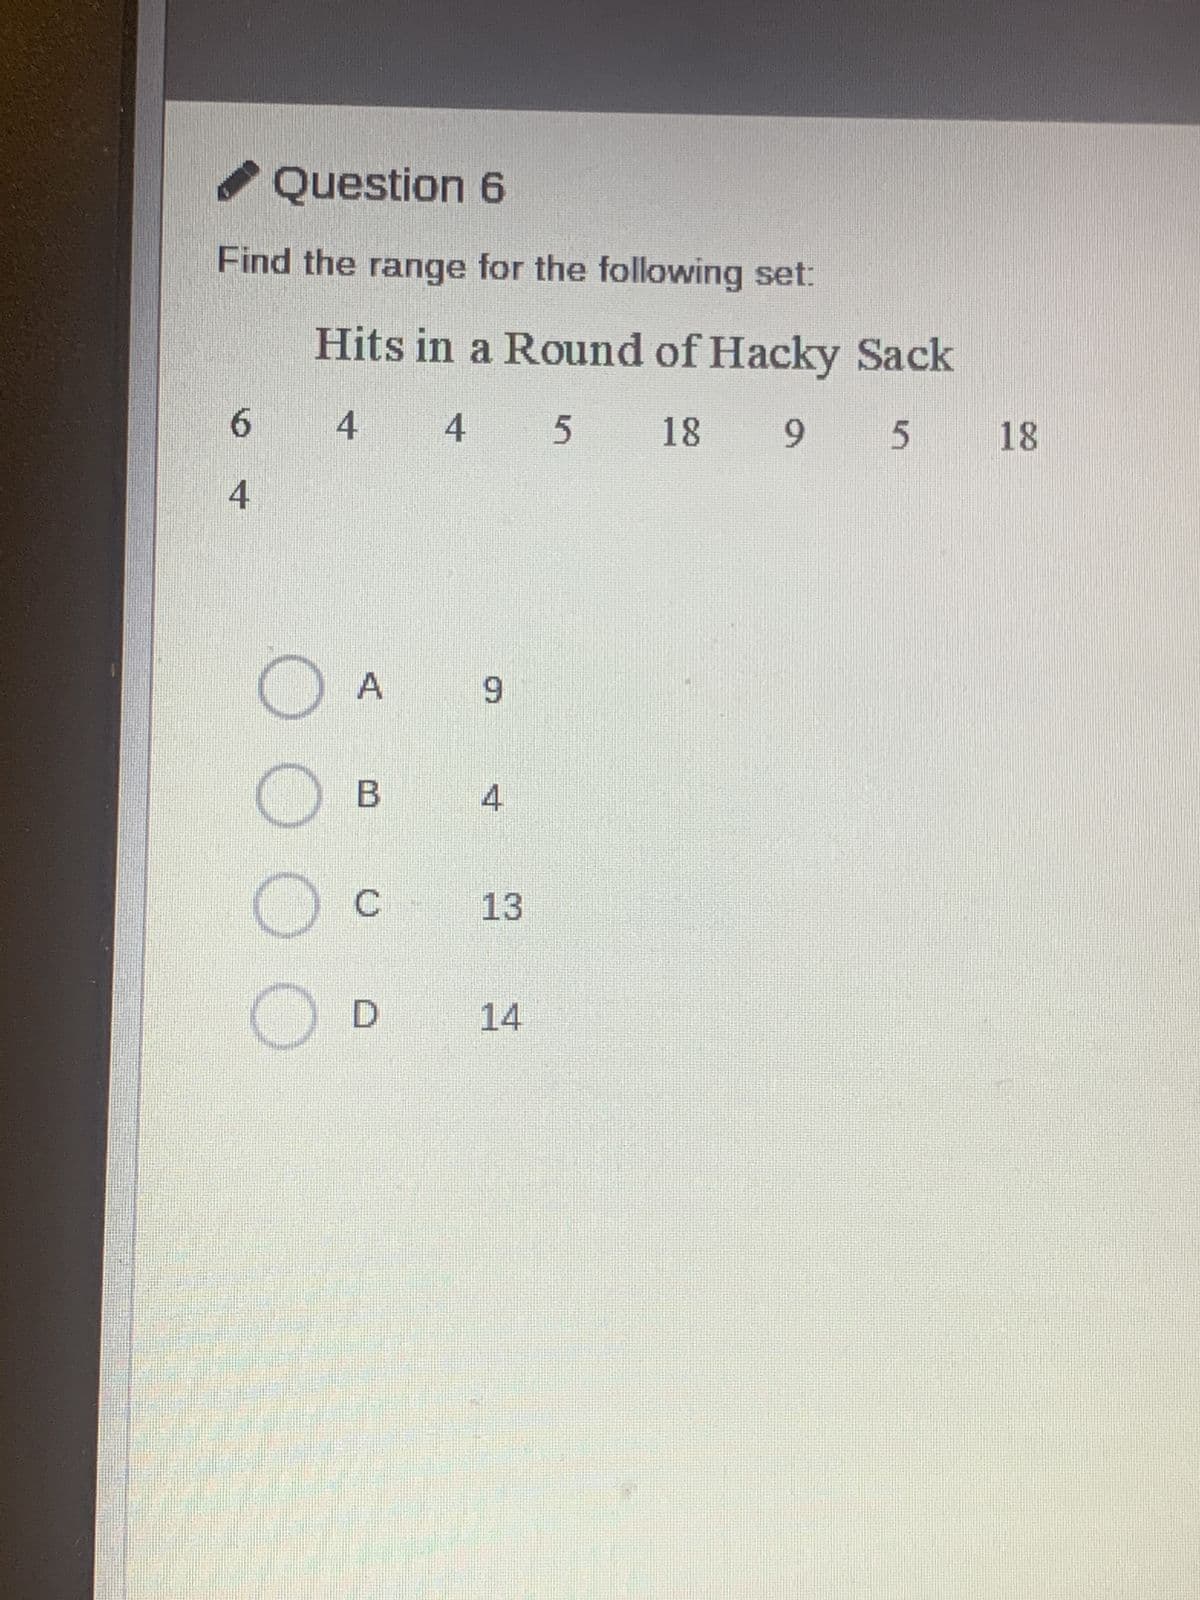 ✔ Question 6
Find the range for the following set:
Hits in a Round of Hacky Sack
6
4 4 5 18
18 9 5
18
4
A
9
☐ B
4
O
C
13
D
14